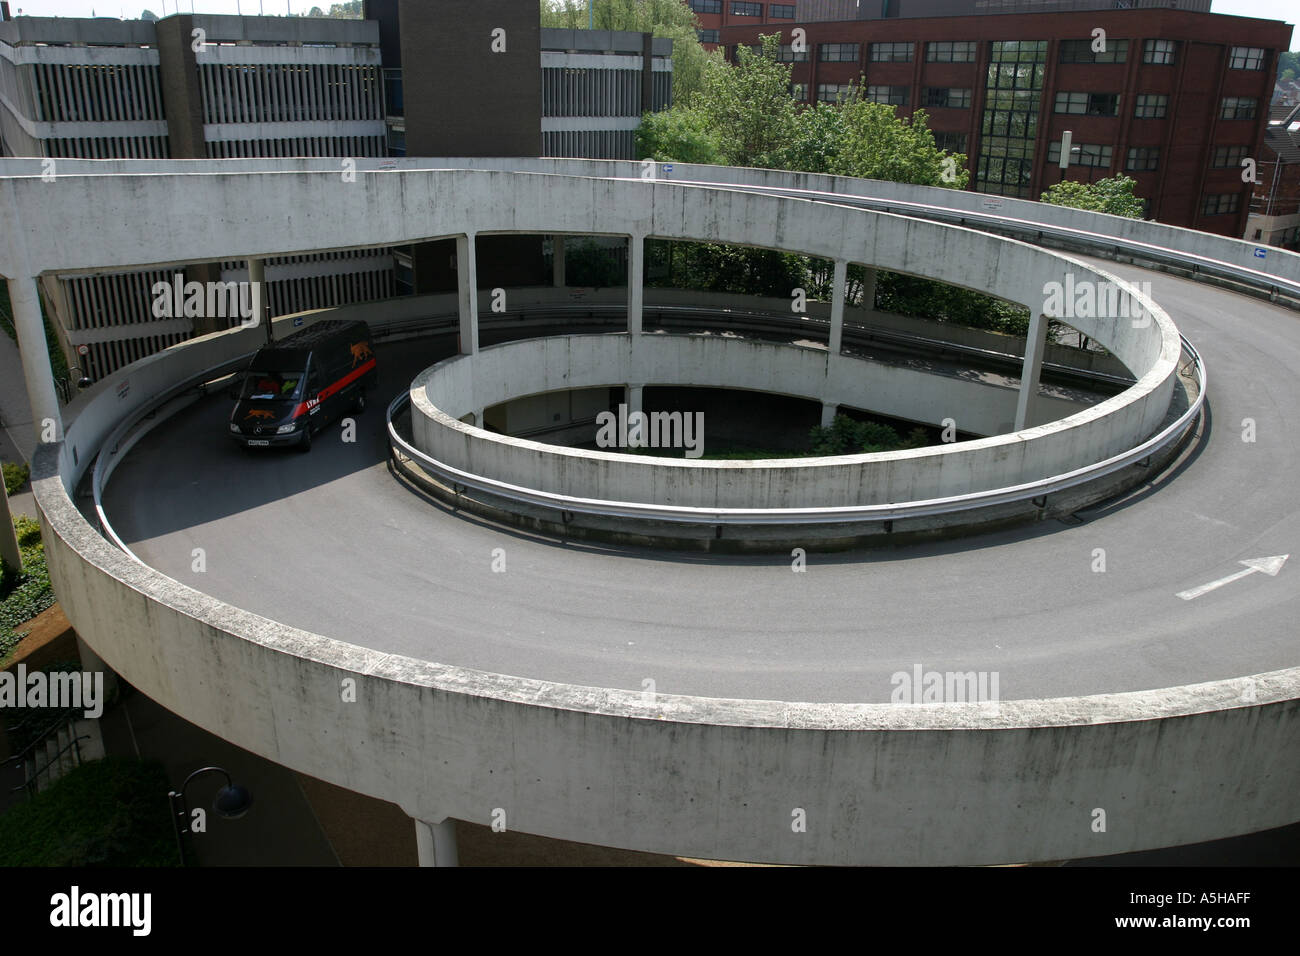 A concrete spiral ramp part of the Brunel Shopping Centre in Swindon Wiltshire Stock Photo